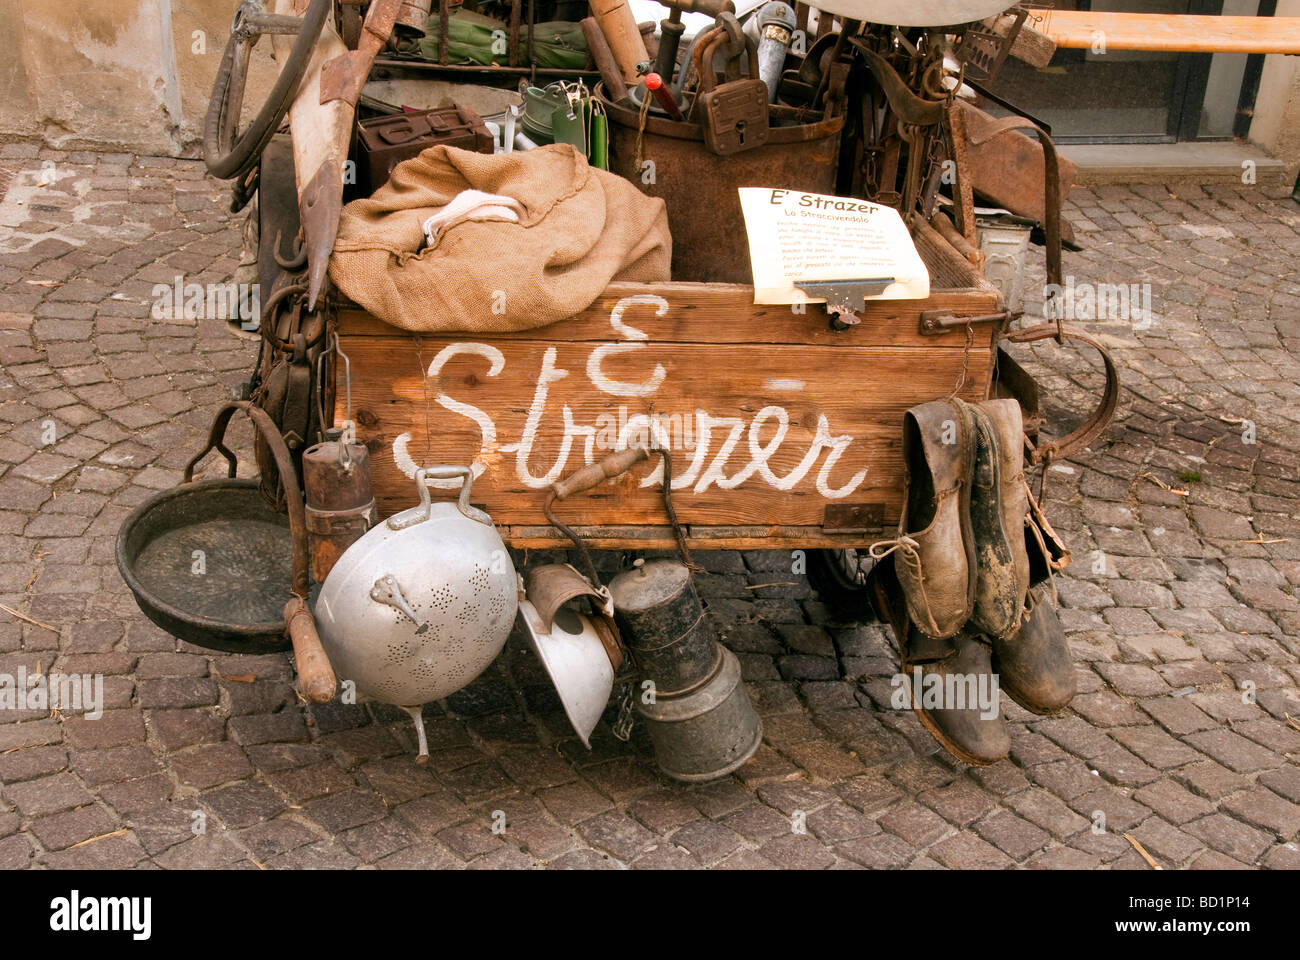 Vintage tinker's bicycle on display at a festival of old traditions in Sansepolcro Tuscany Stock Photo